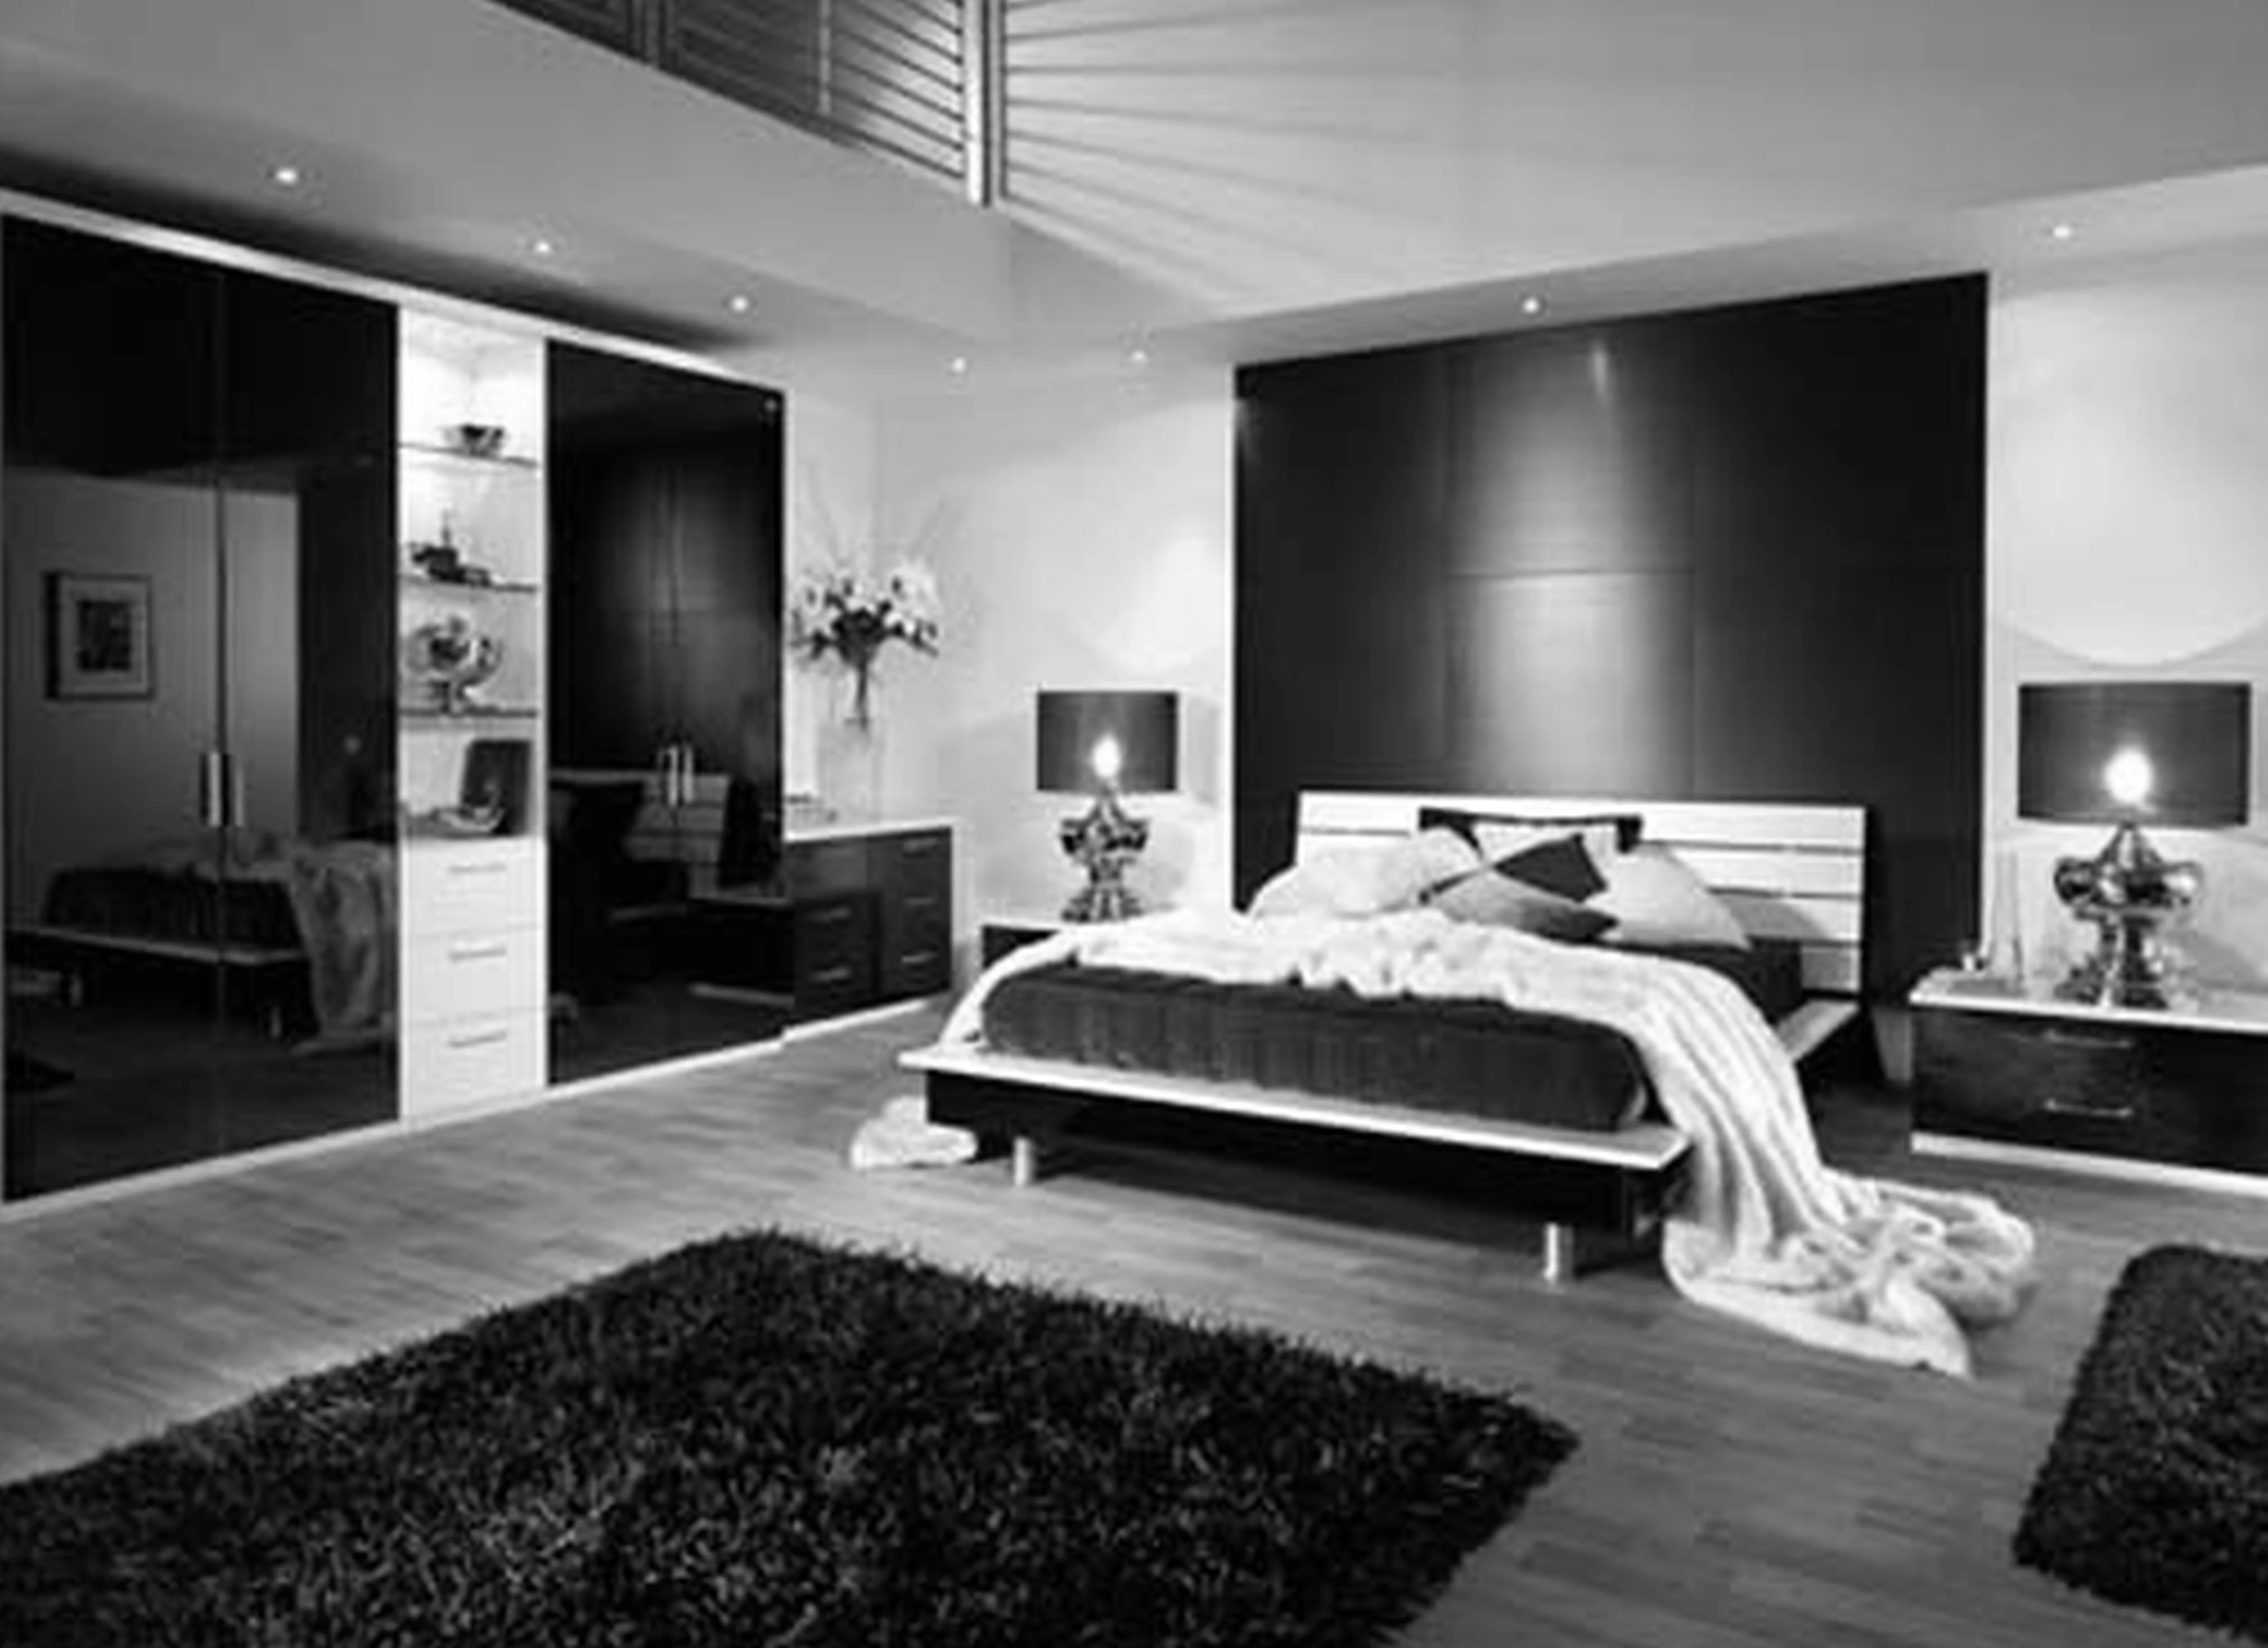 Bedroom Design Ideas Black And White Photos Home Design Ideas Within Waking Imagination In Creating Creations Bedroom Design Ideas Black And White